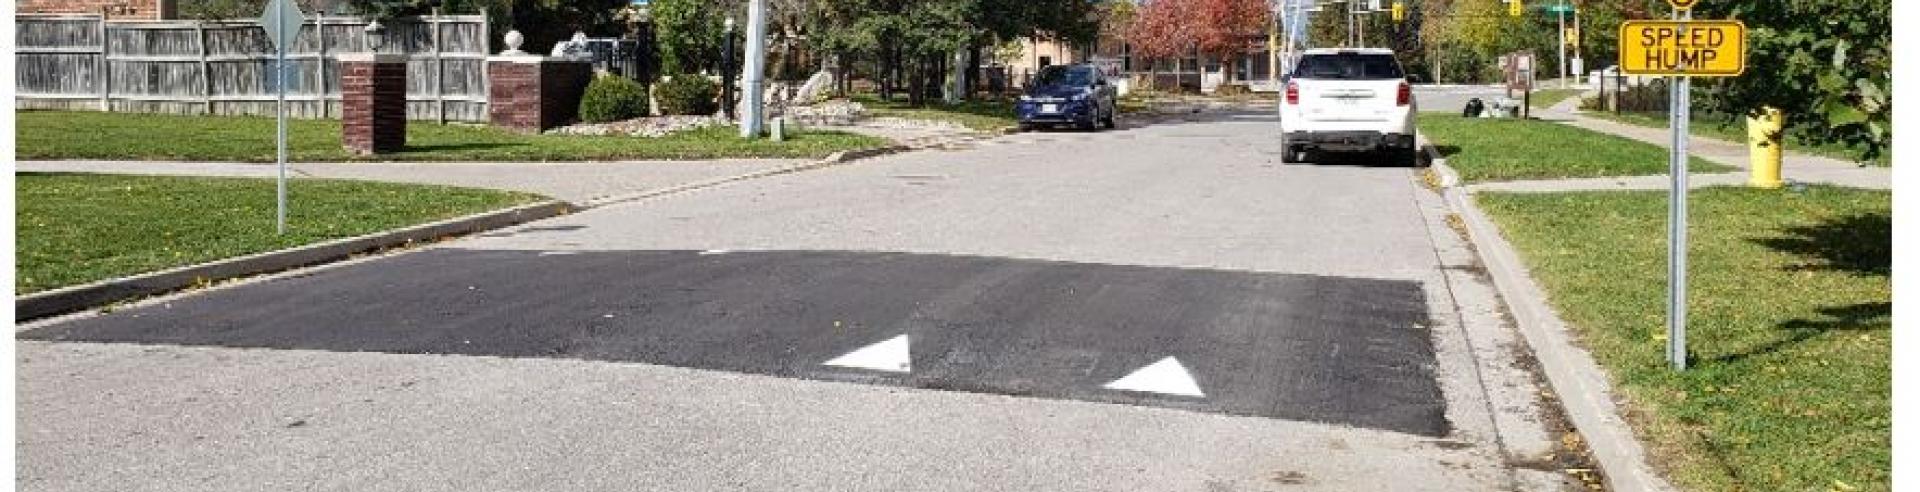 Speed hump on a road